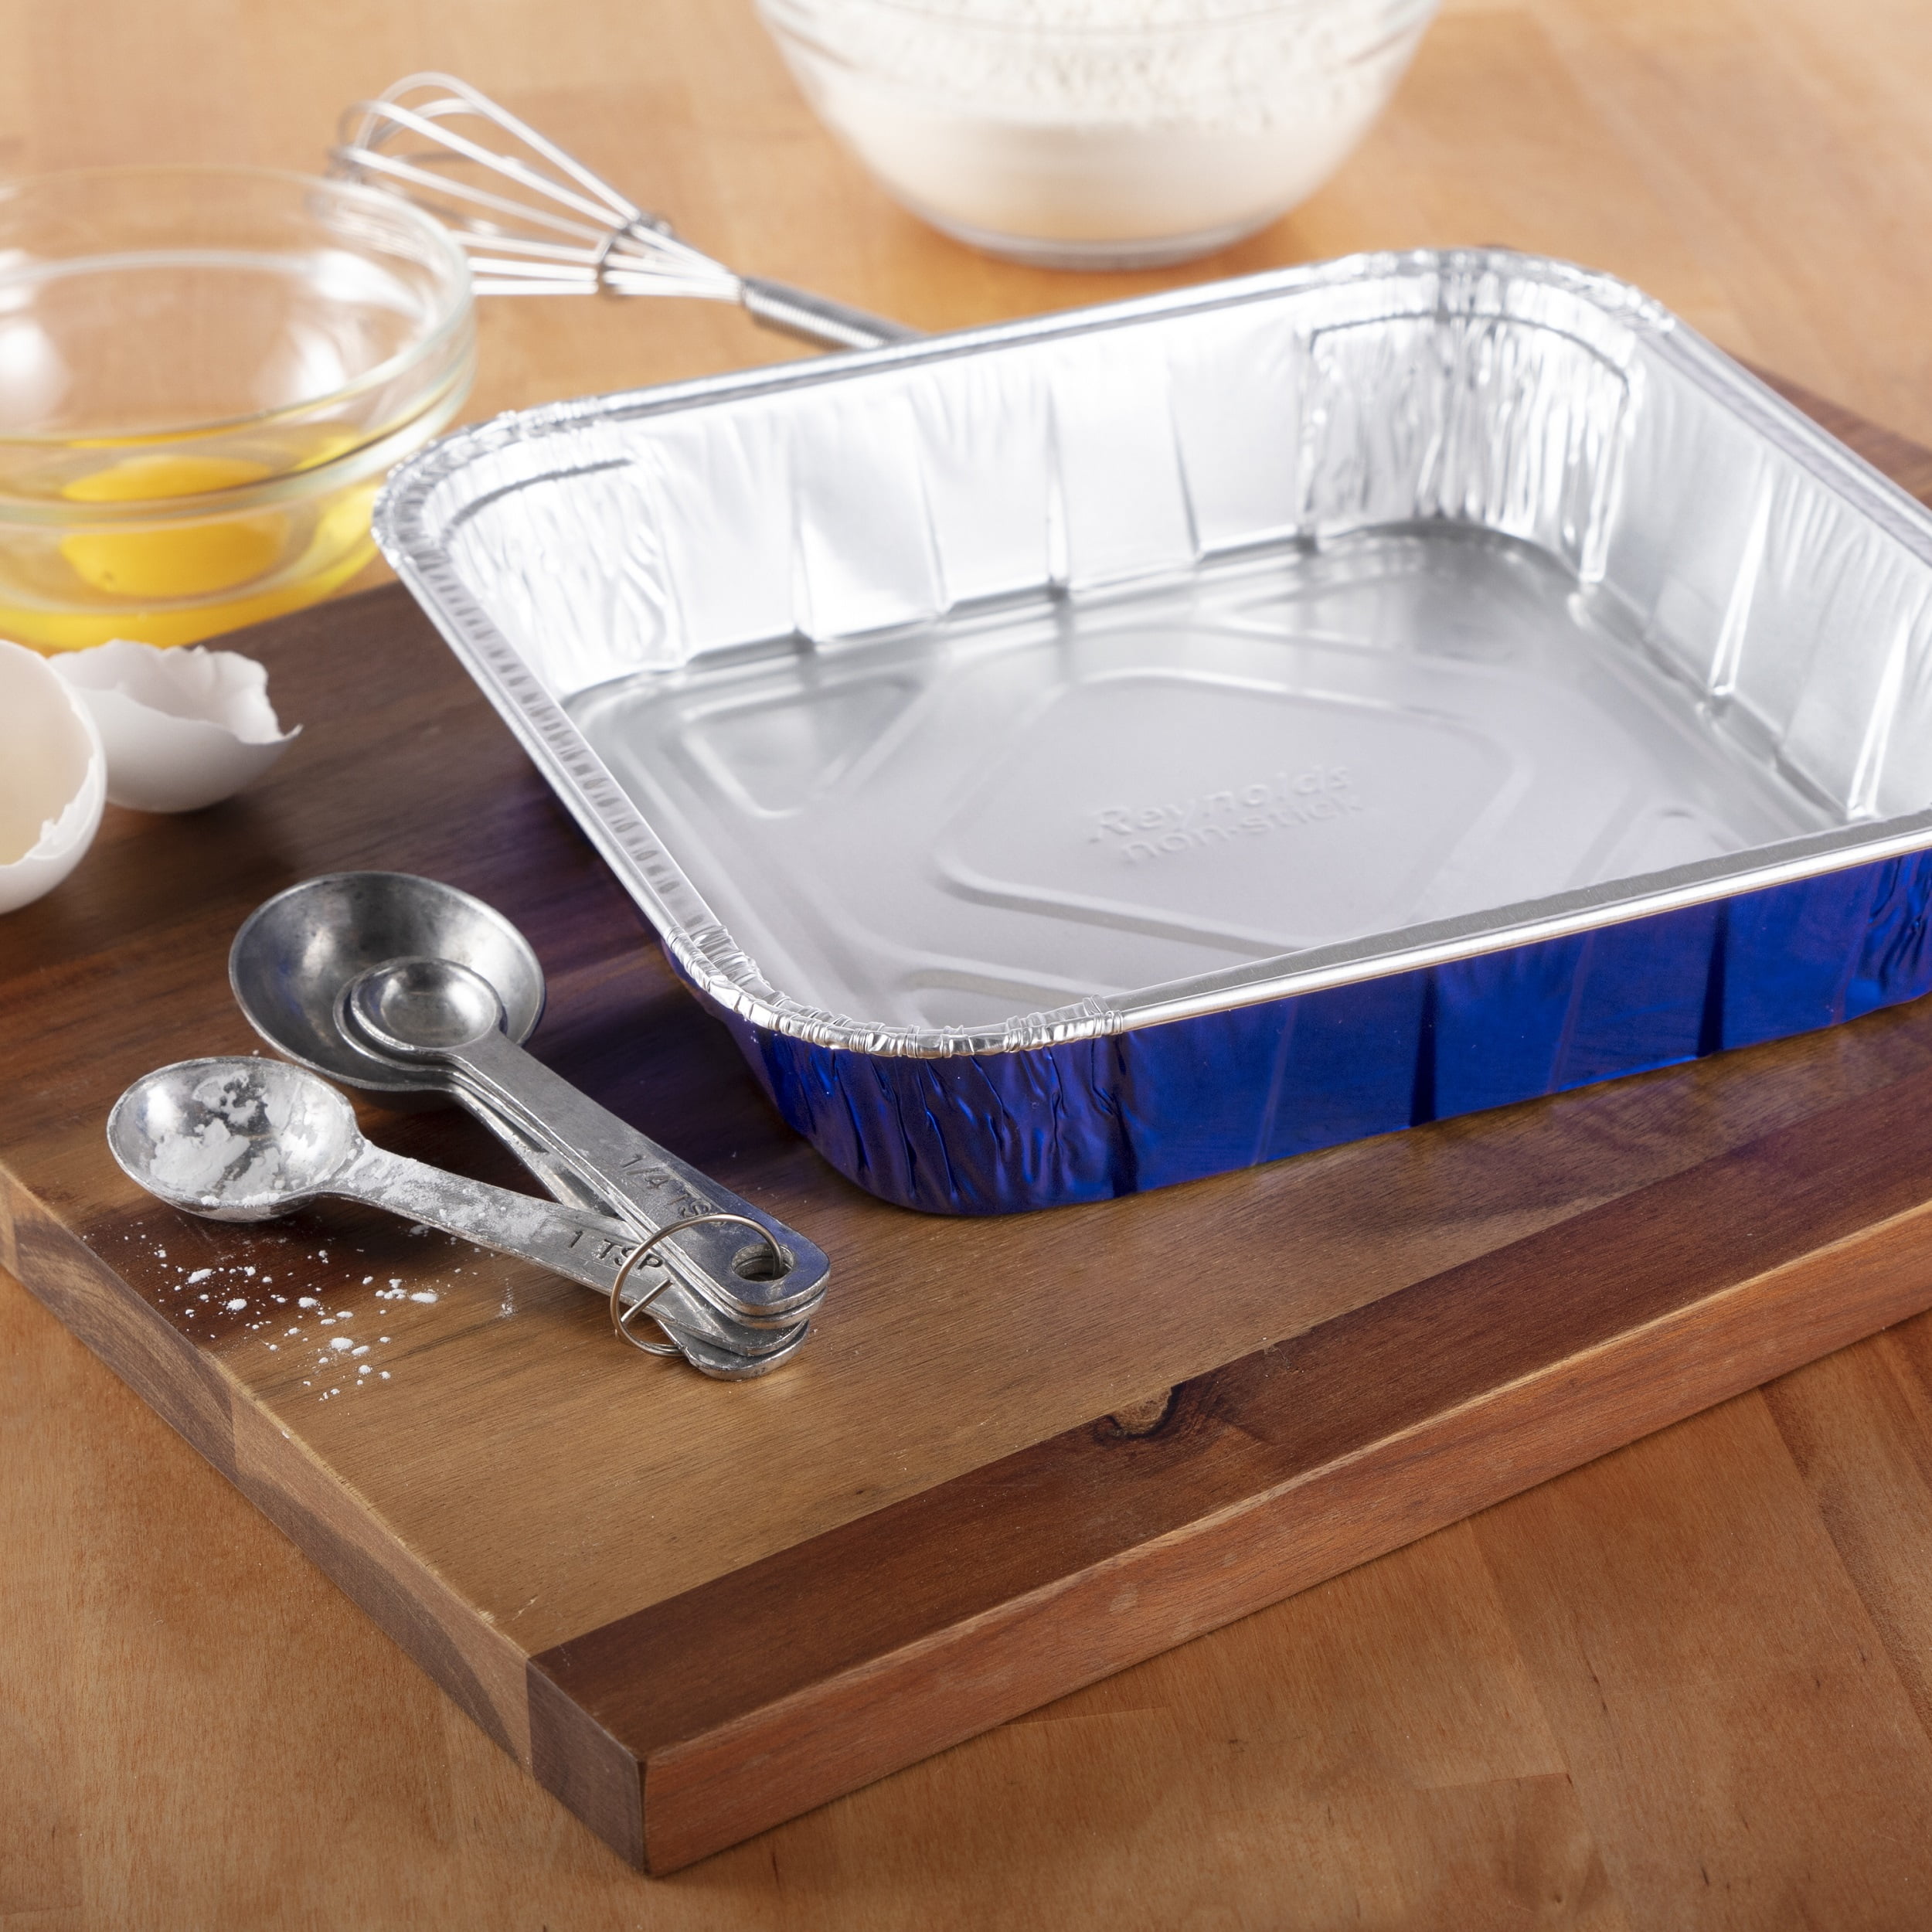 Reynolds To-Go Aluminum Pans with Lids, 8x5.375x1.75 inch, 20 Count